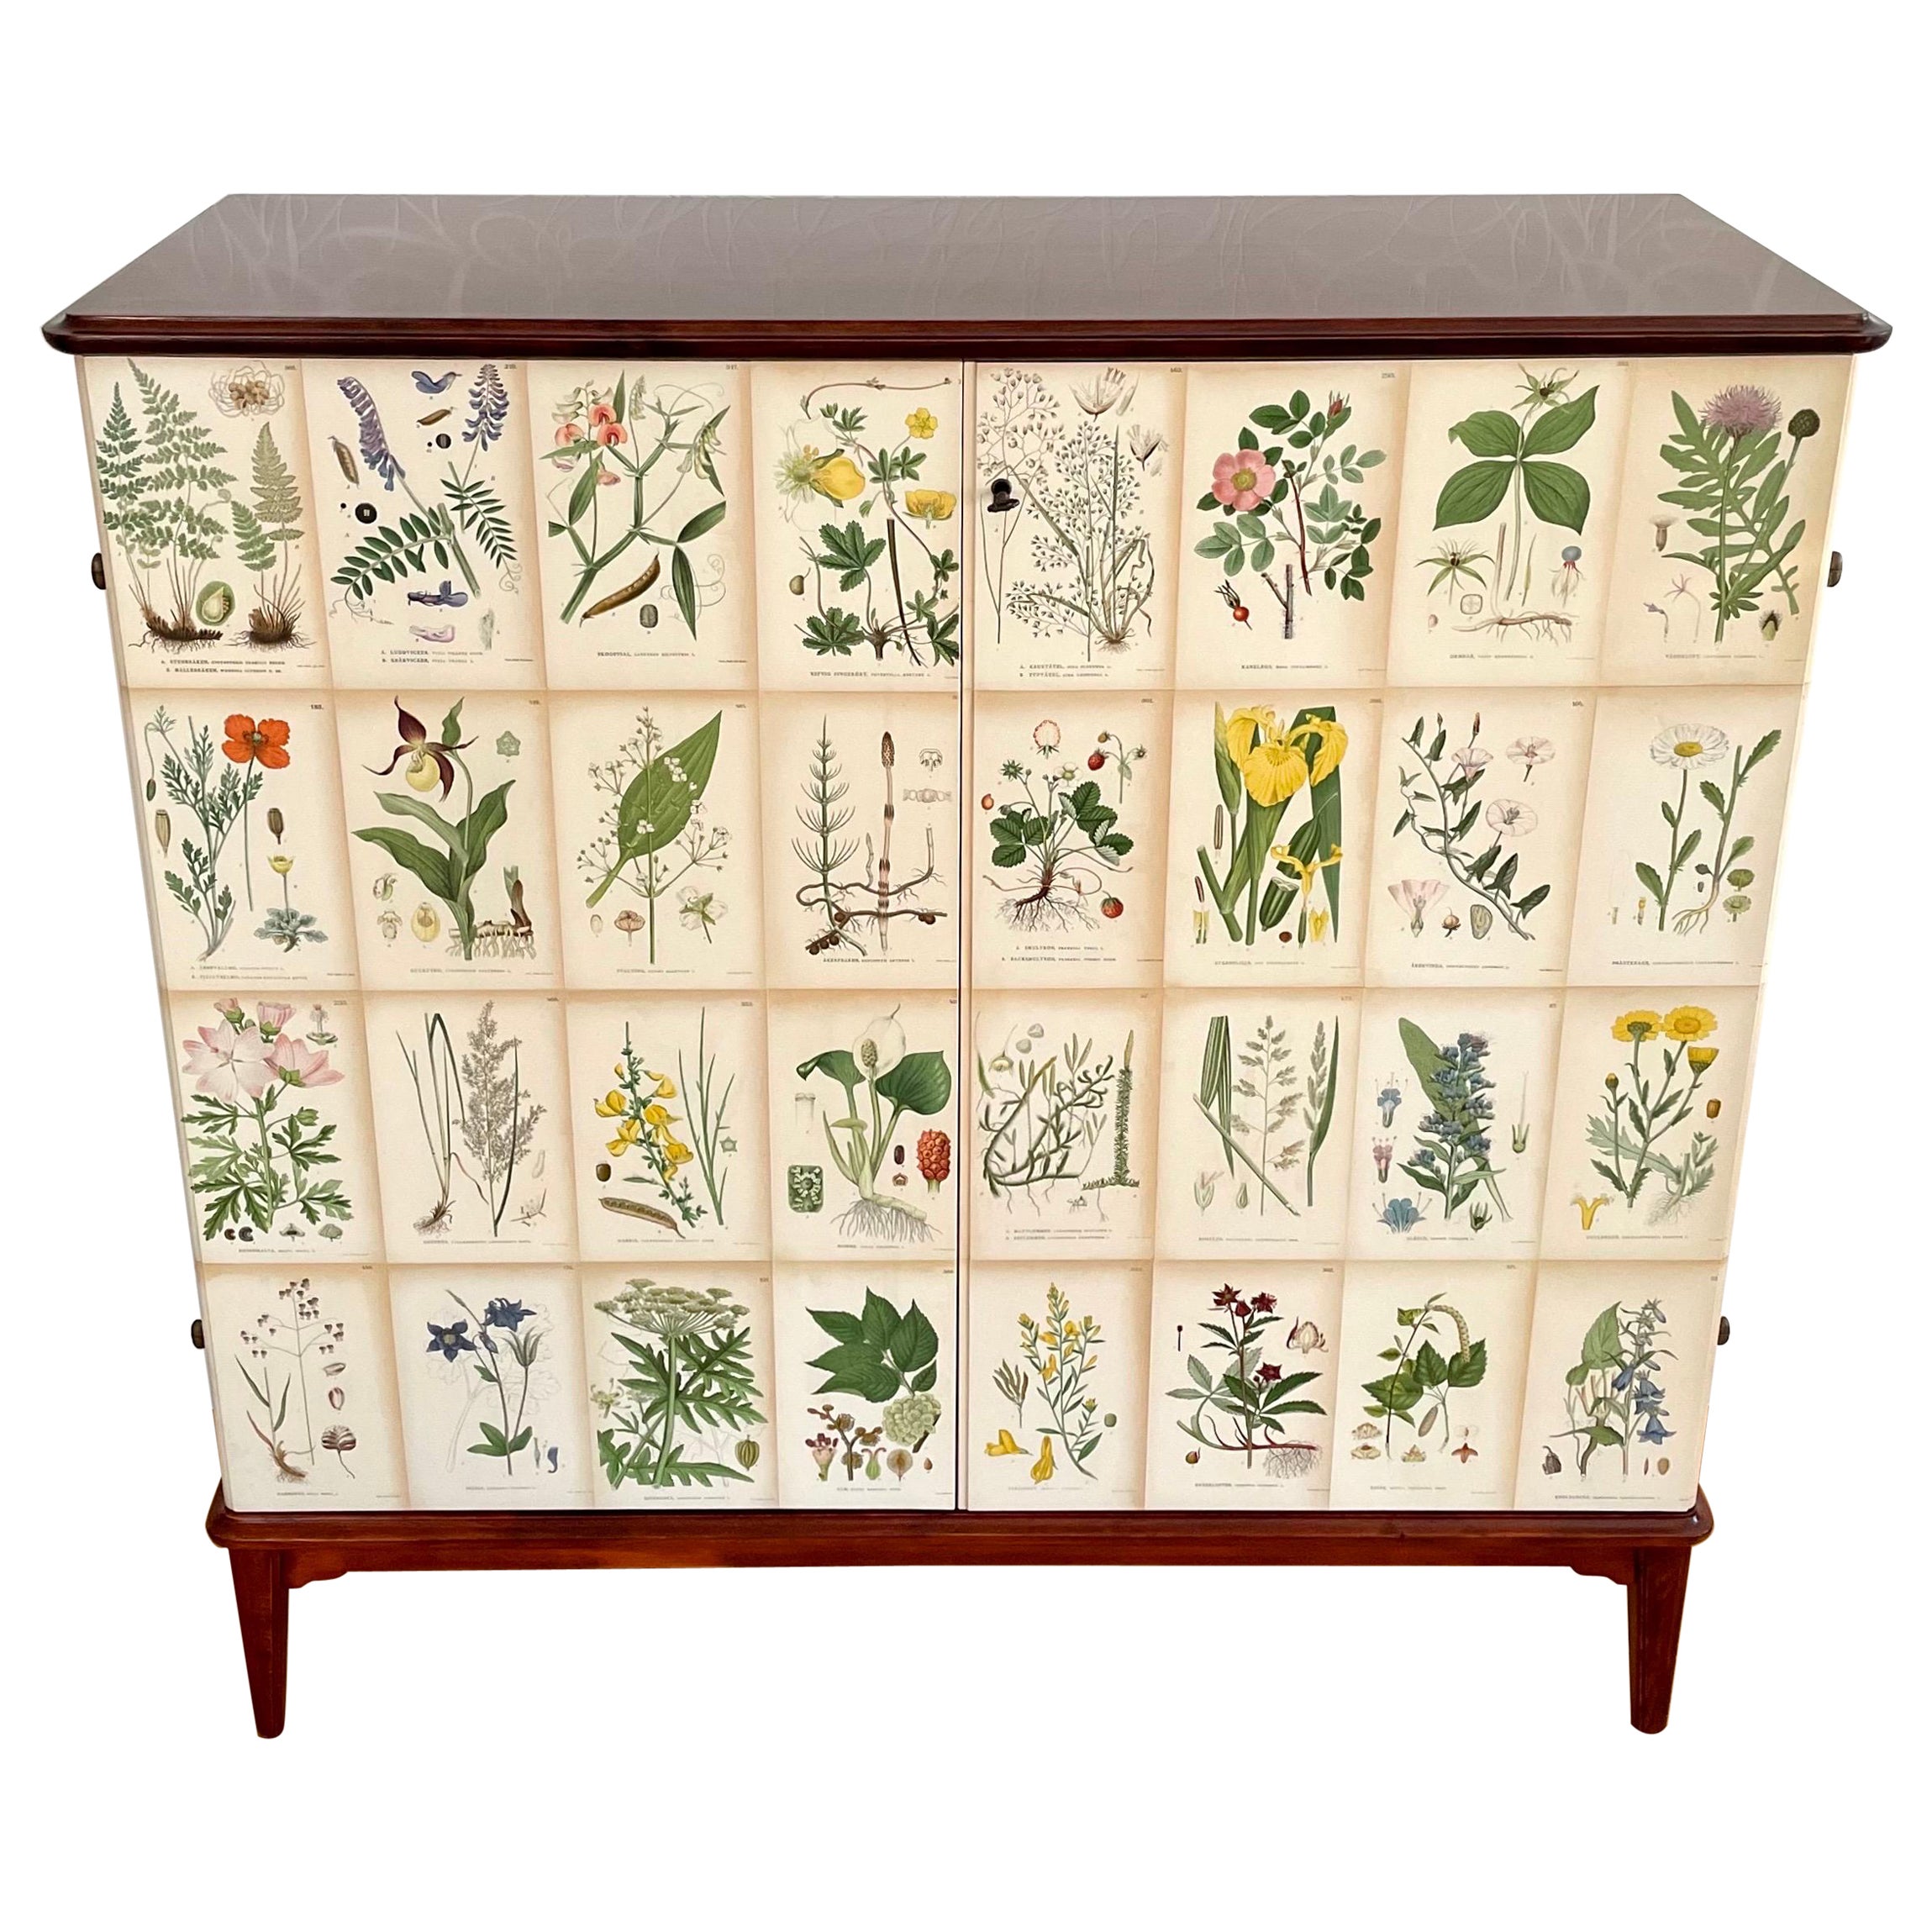 Swedish Modern 1950s Mahogny Cabinet with Nordens Flora (Nordic Flowers) Decor 
 For Sale